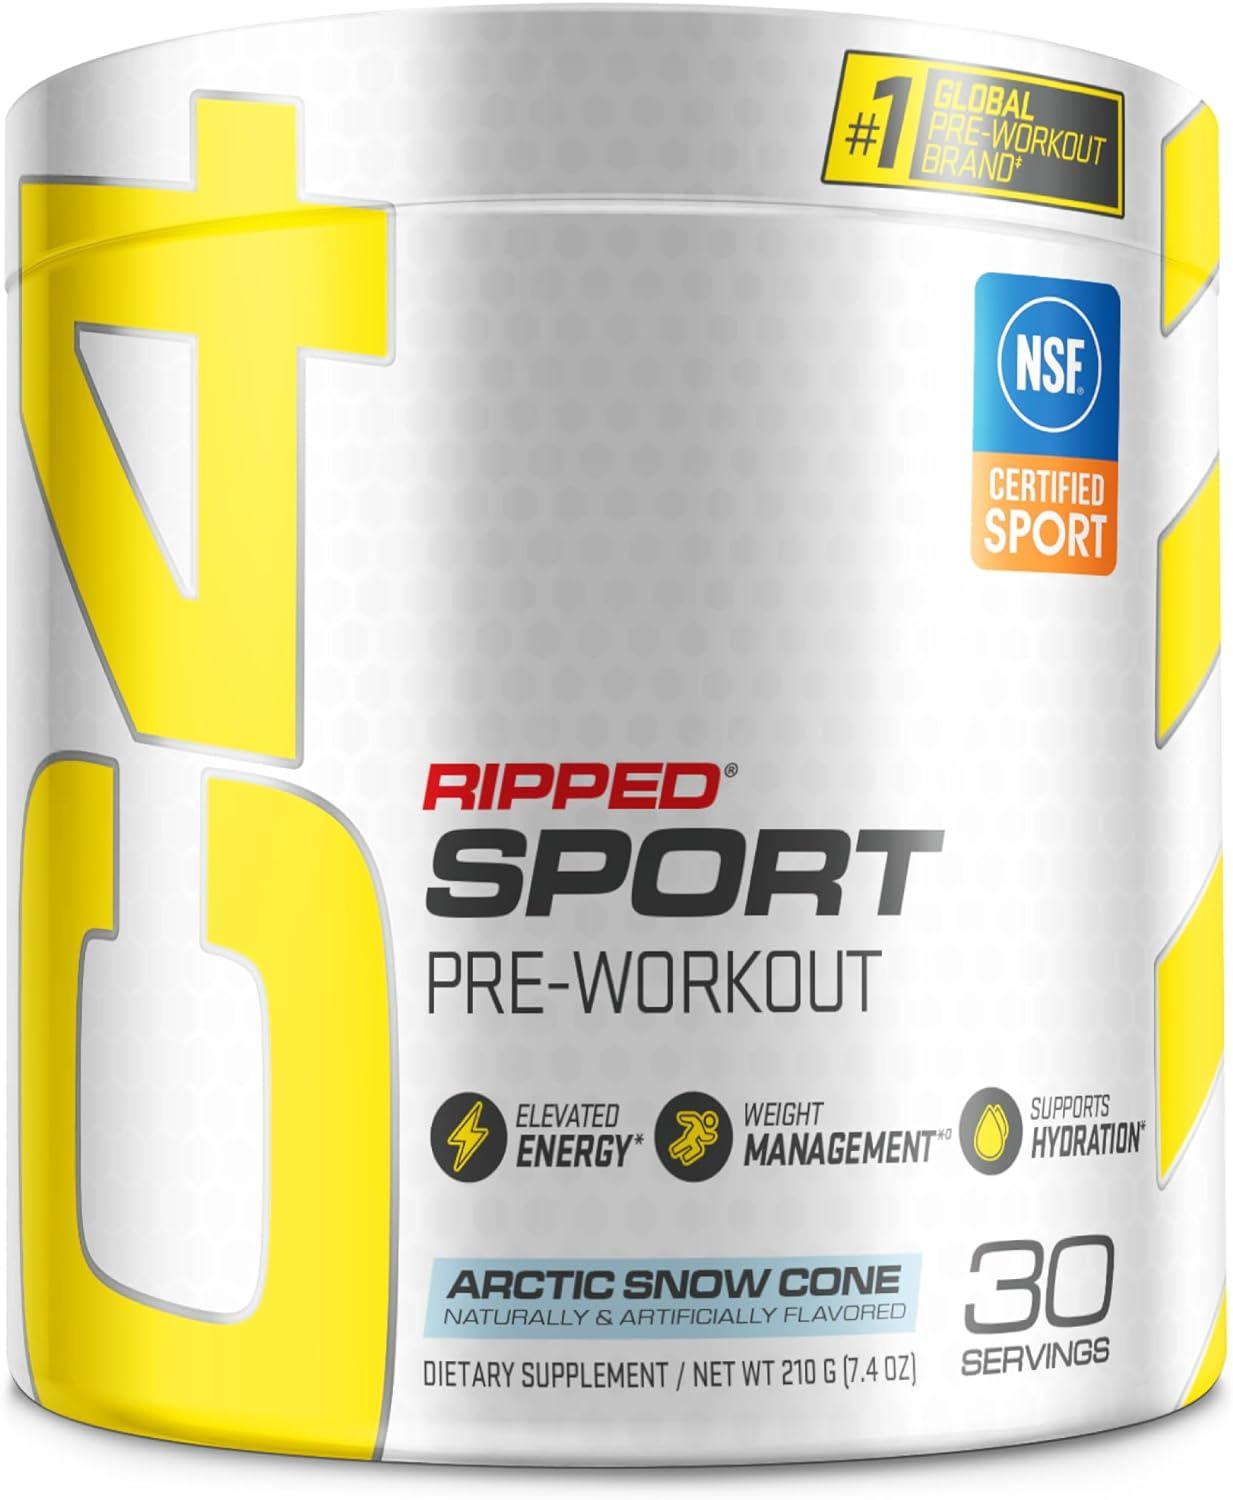 C4 Ripped Sport Pre Workout Powder Arctic Snow Cone - NSF Certified for Sport + Sugar Free Preworkout Energy Supplement for Men  Women - 135mg Caffeine + Weight Loss - 30 Servings